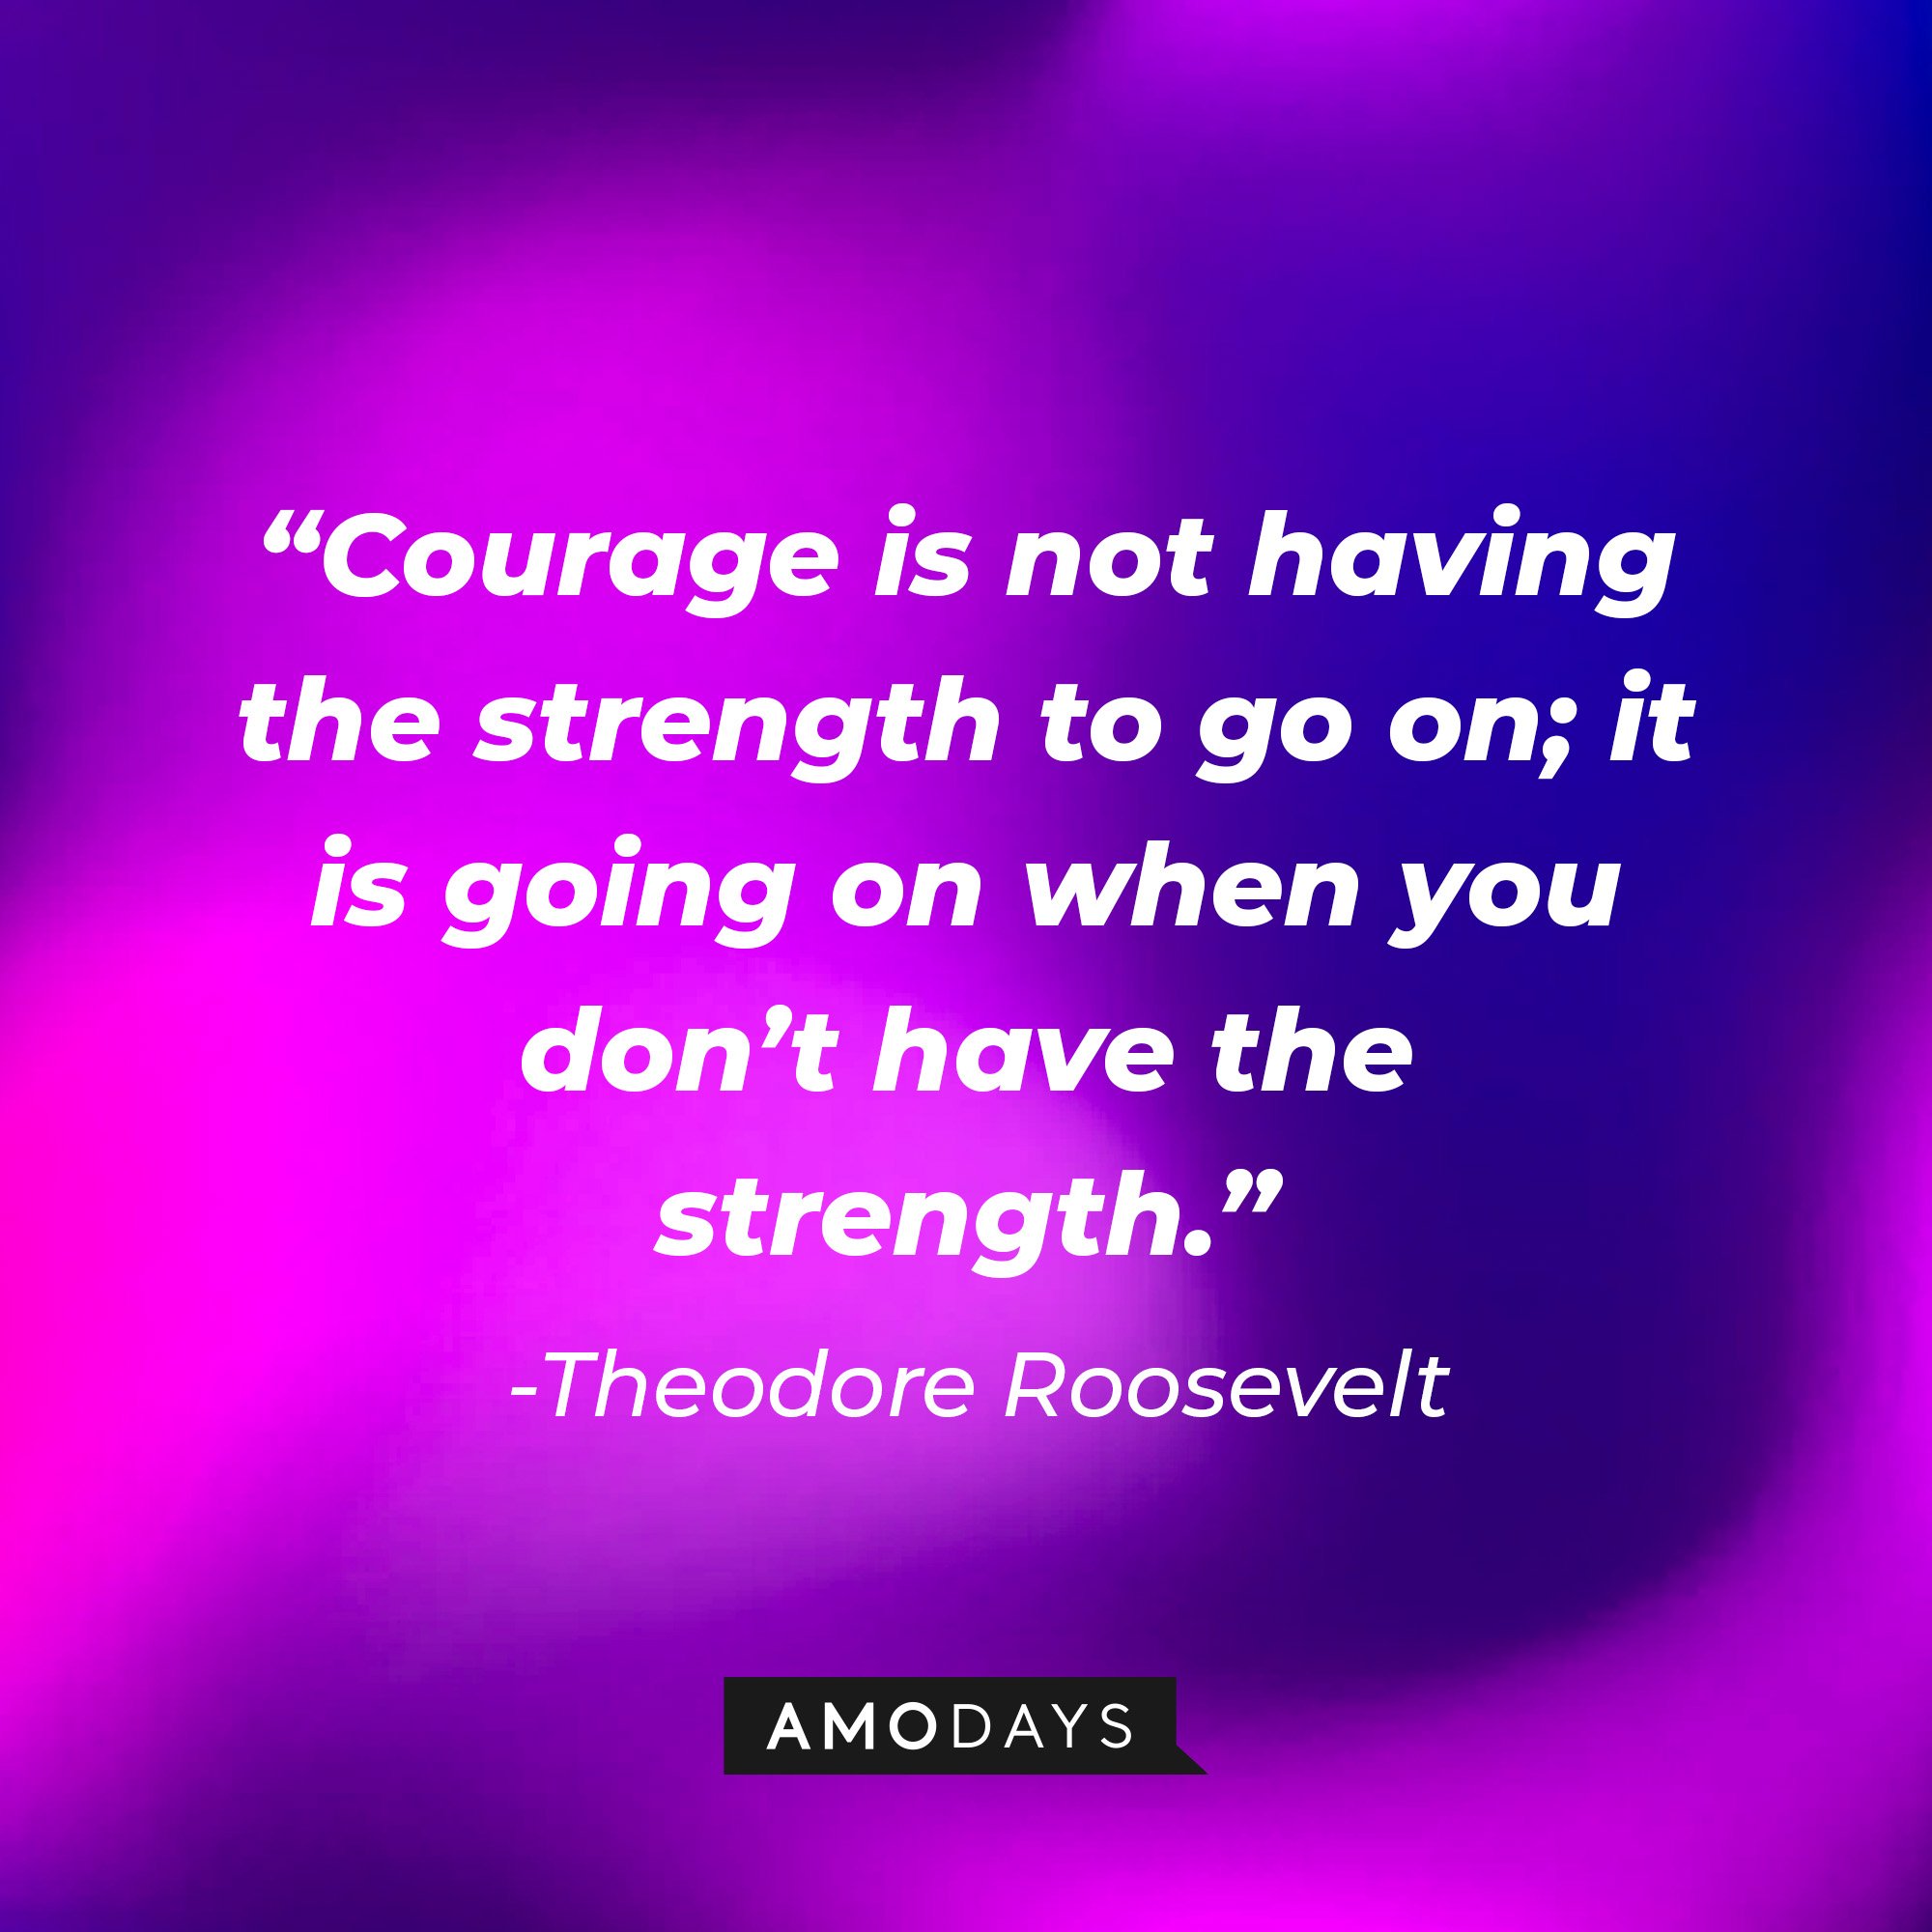 Theodore Roosevelt's quote: “Courage is not having the strength to go on; it is going on when you don’t have the strength.” | Image: AmoDays